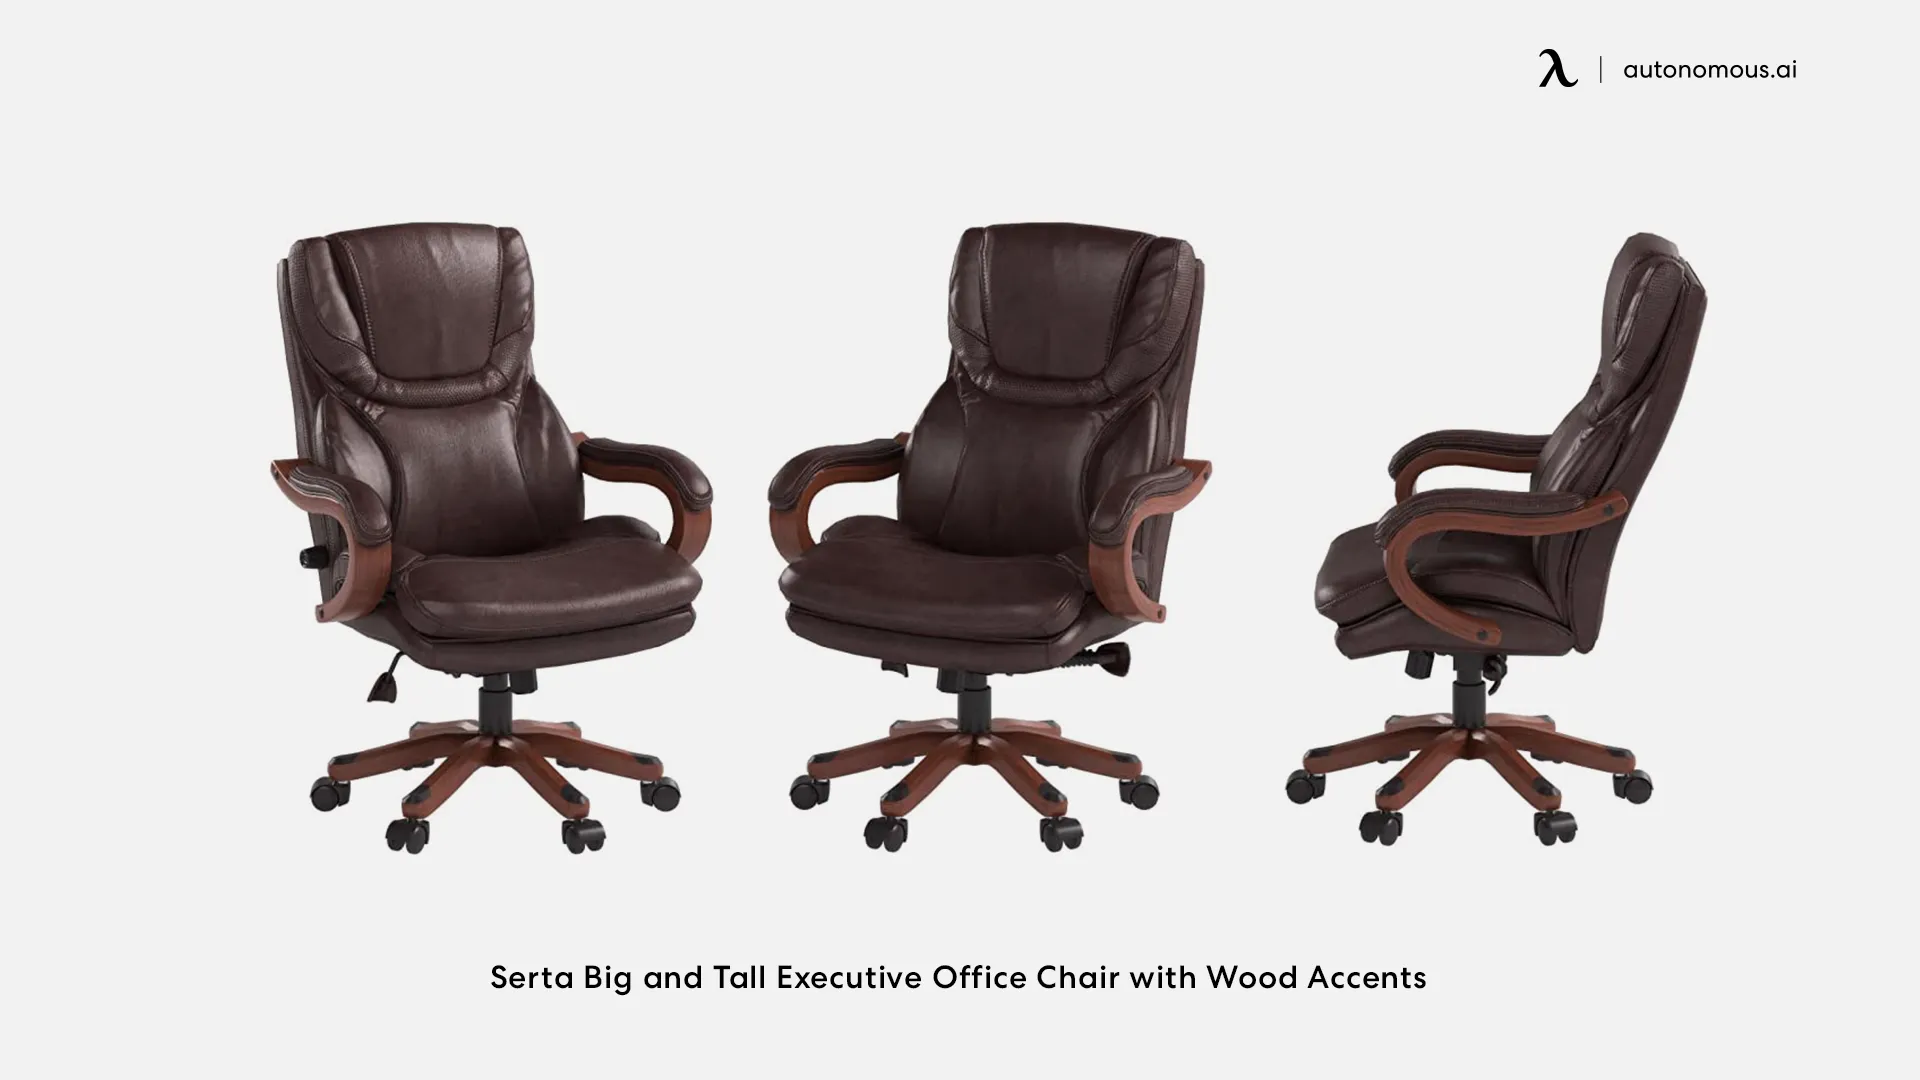 Serta Big and Tall Executive Office Chair with Wood Accents